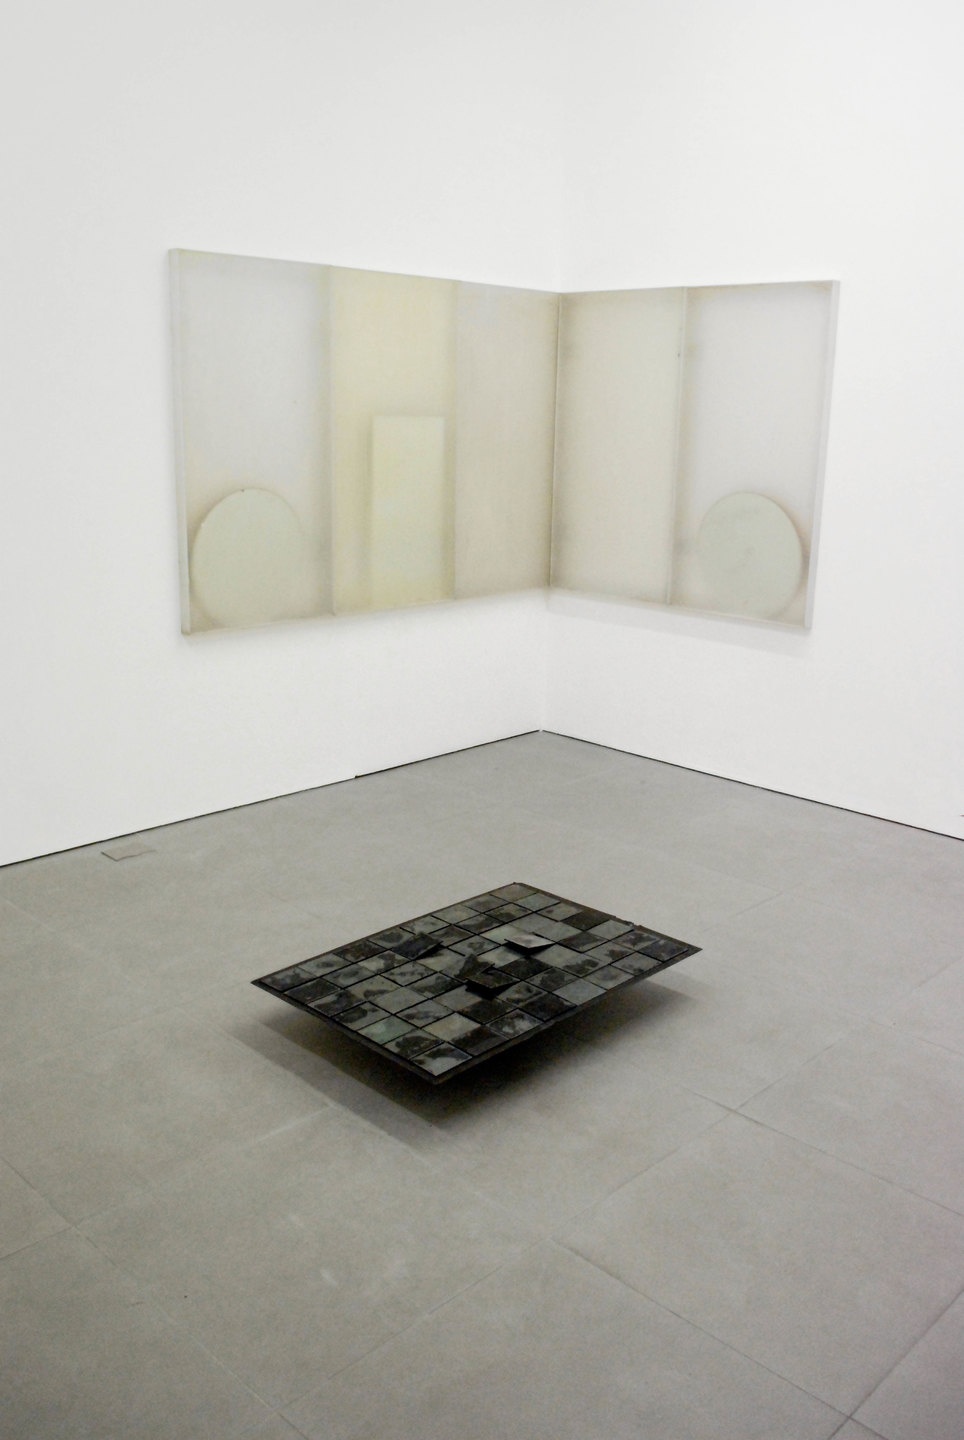 Adam Thompson, 'Untitled (Components & Variables)’, 2010, Light deflector panels, mirrors, photographic plates, rubber sheet, Cell Project Space